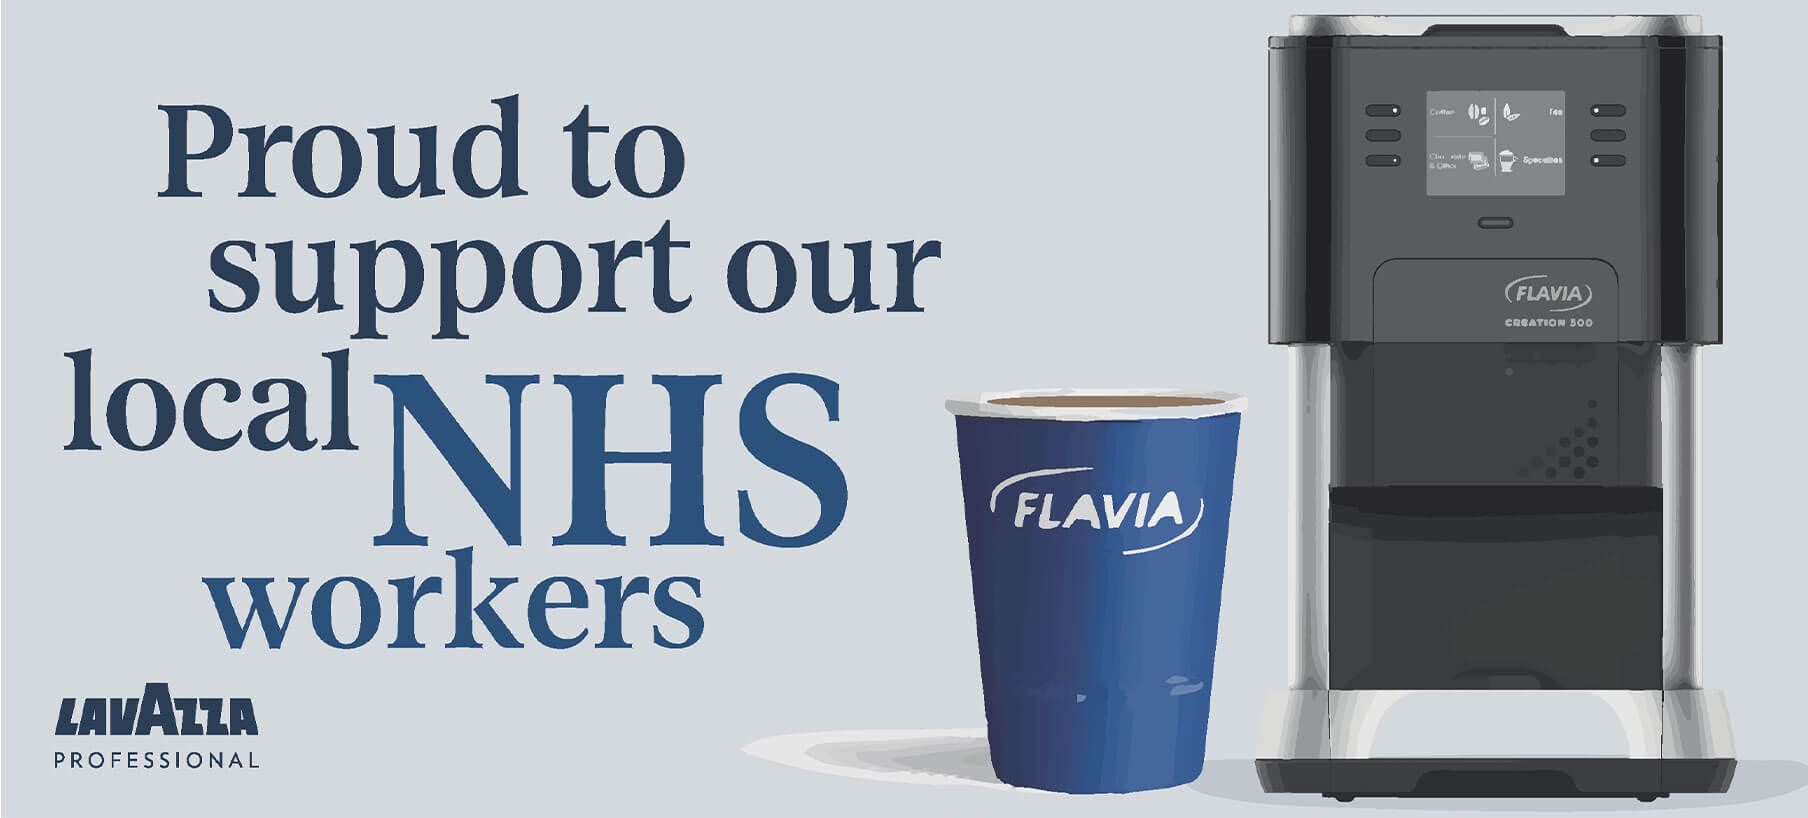 Lavazza Professional NHS Workers